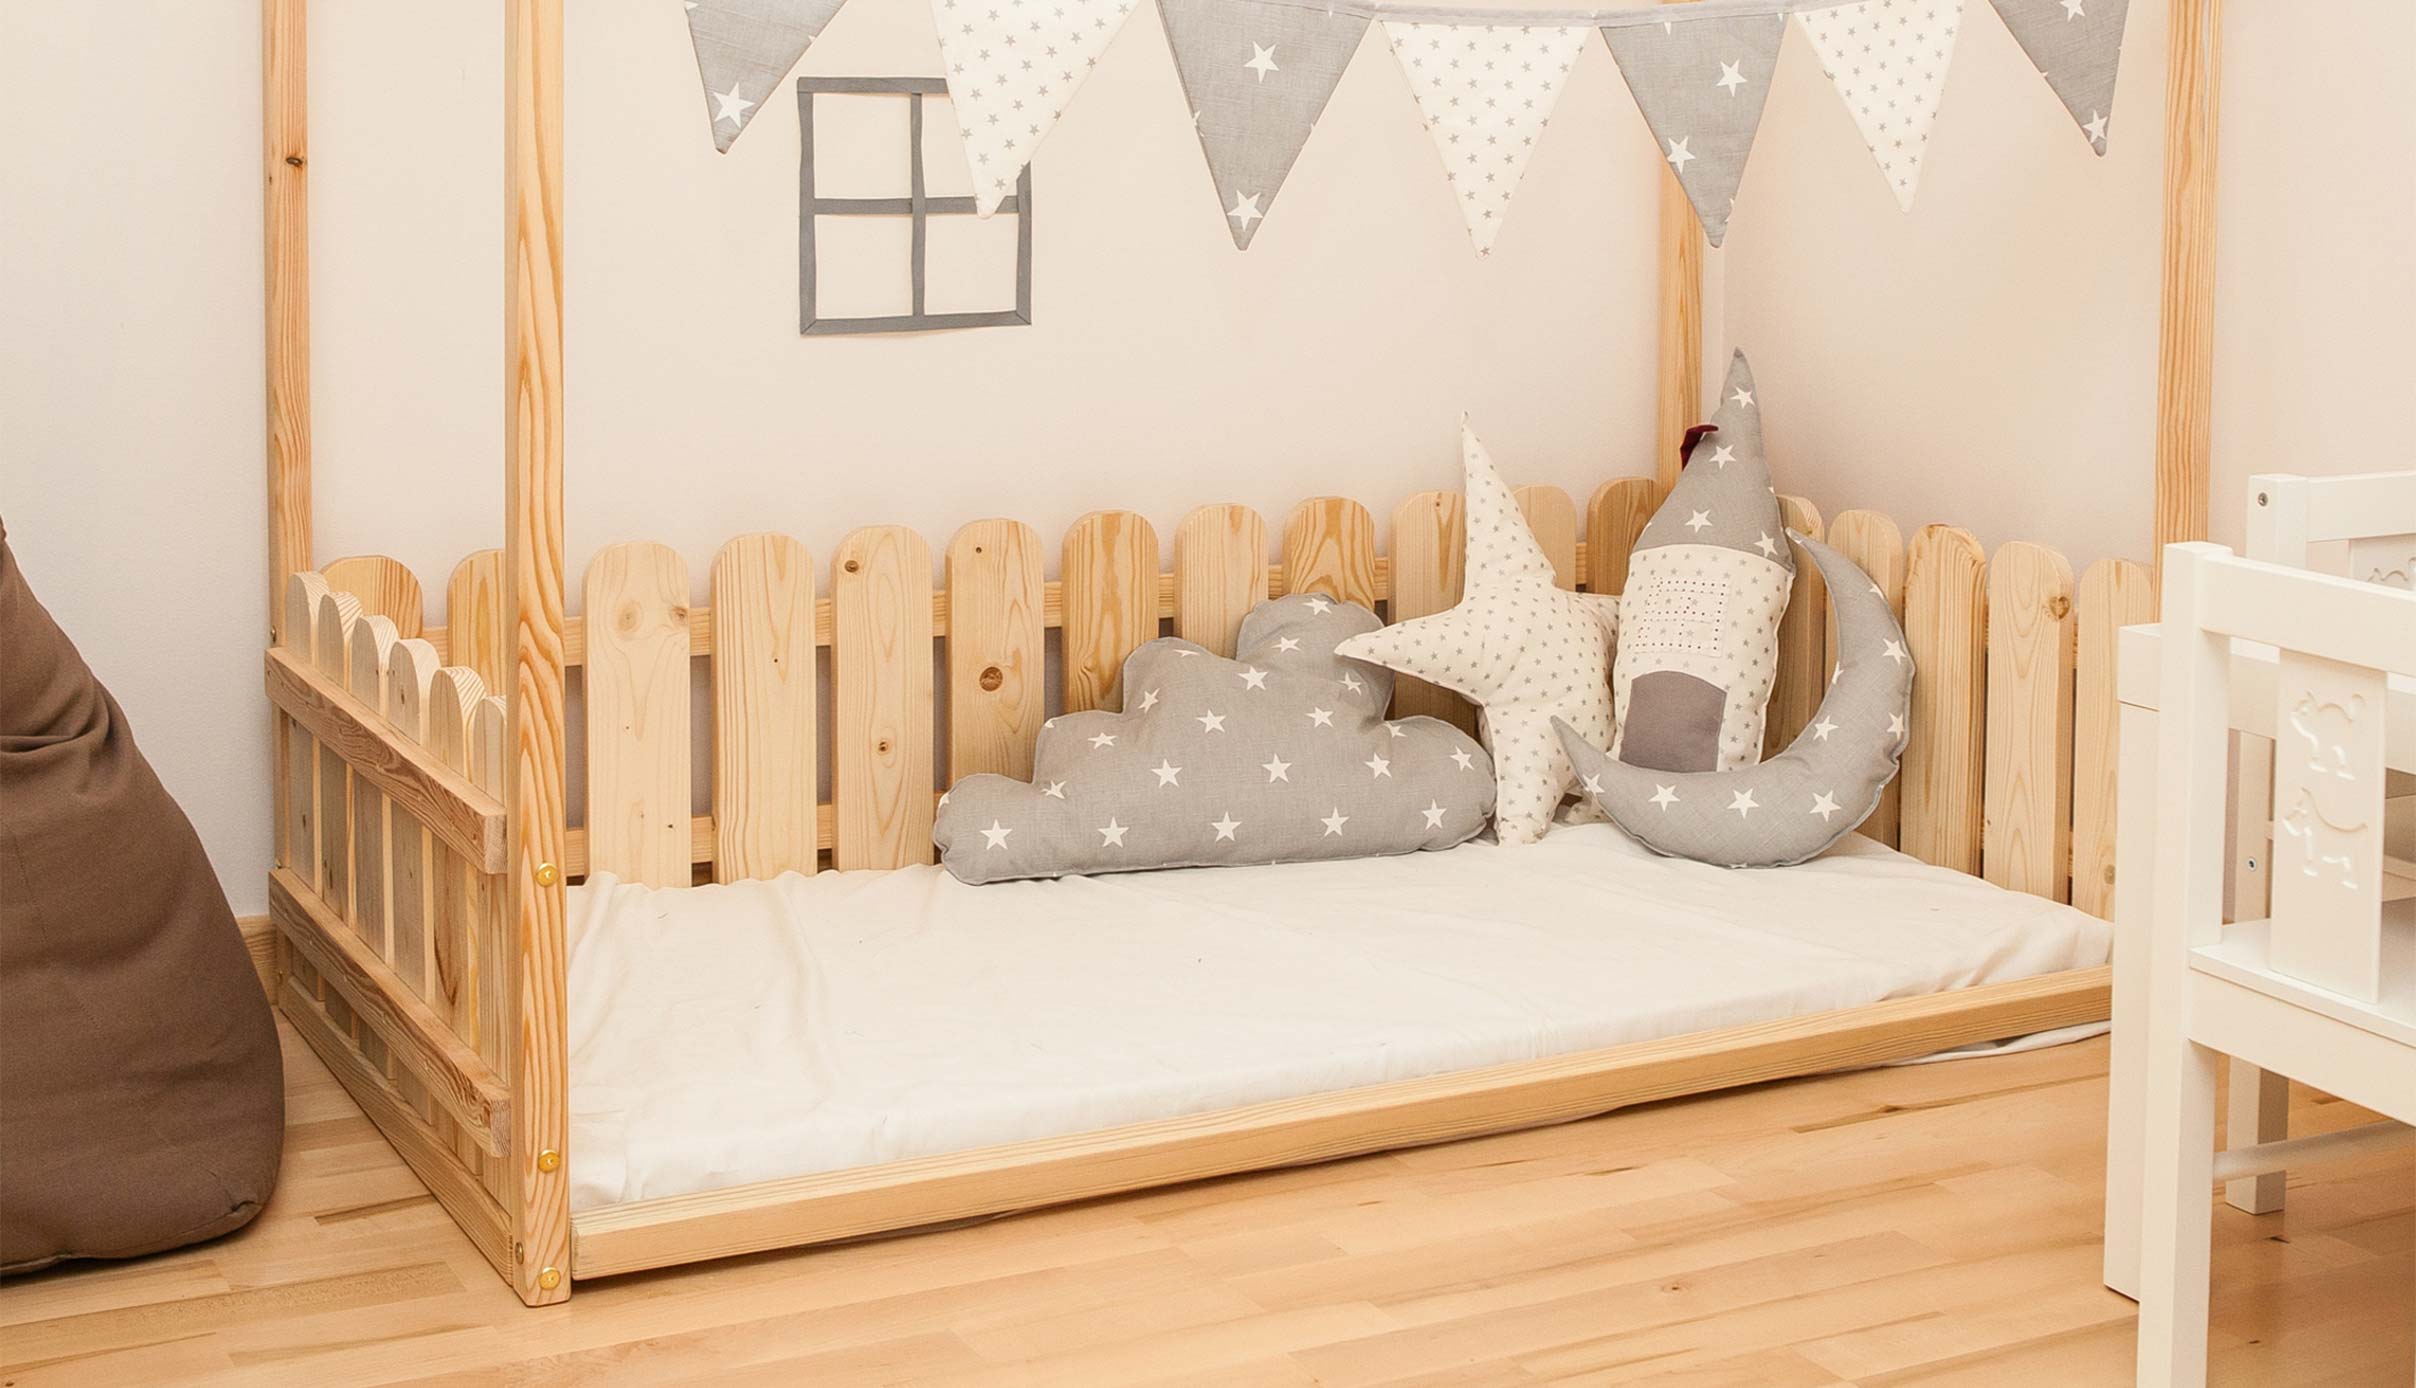 A wooden canopy bed in a child's room.